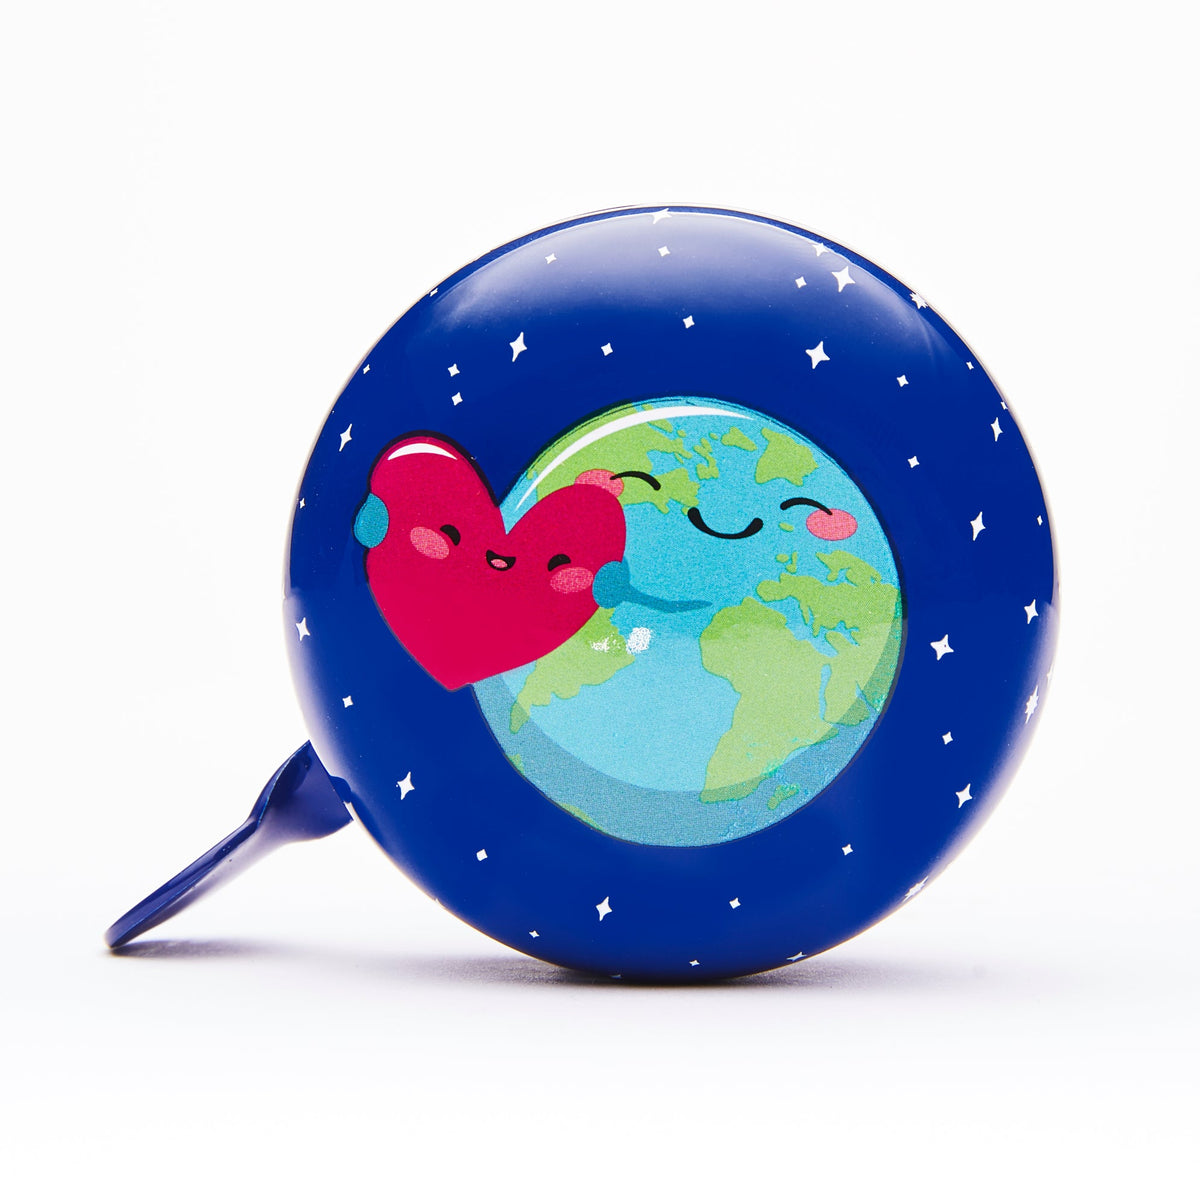 LOVE OUR PLANET BIKE BELL